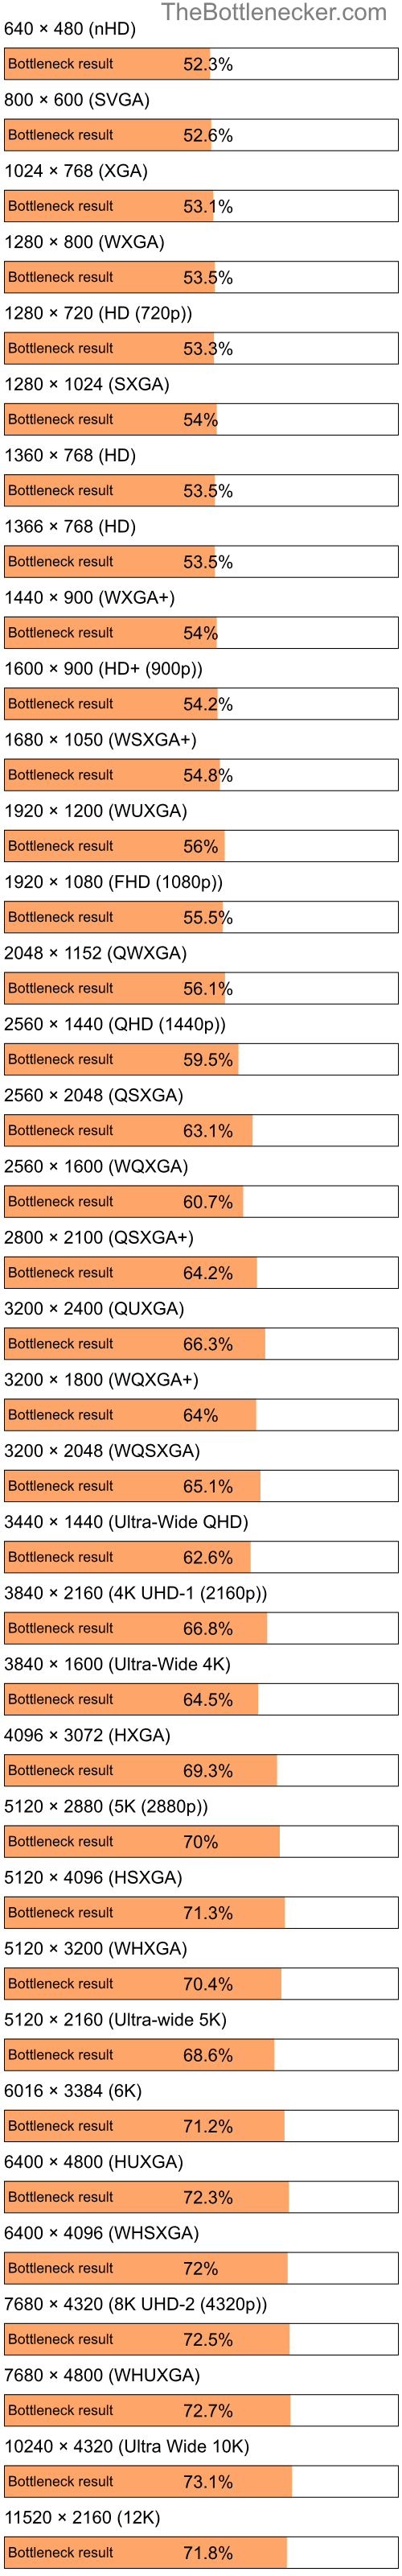 Bottleneck results by resolution for Intel Pentium 4 and NVIDIA GeForce 210 in Processor Intense Tasks